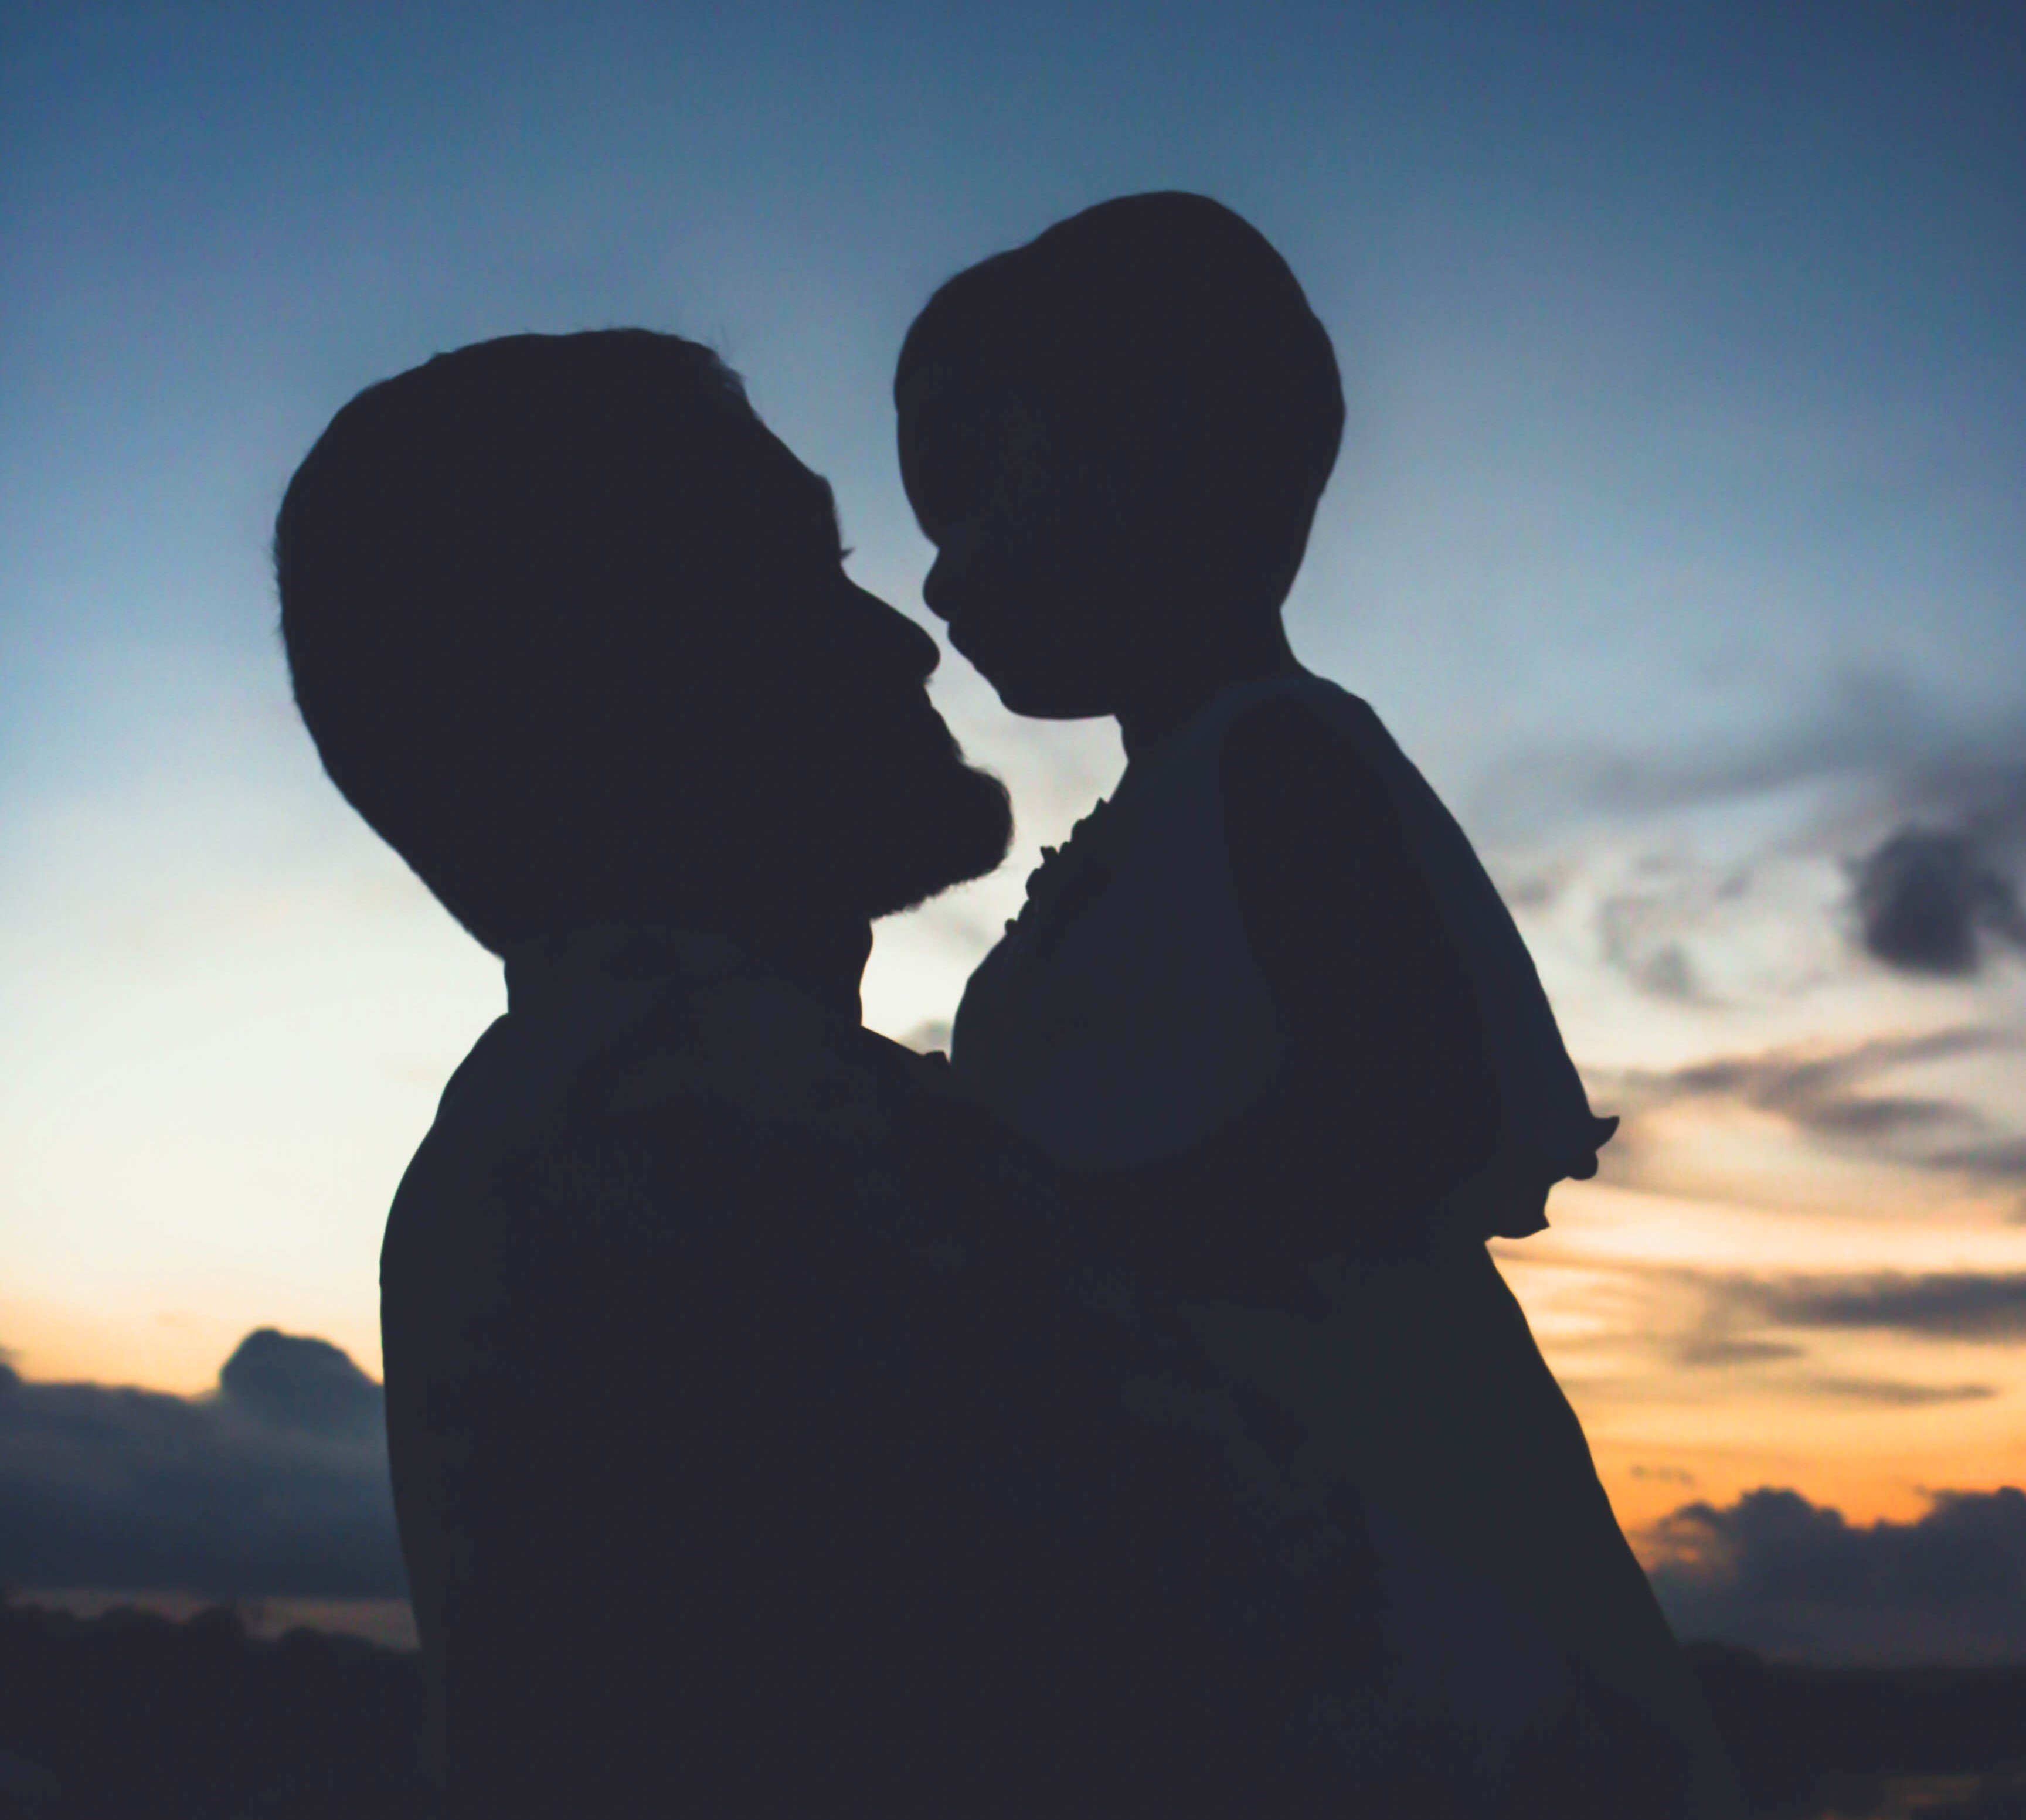 Daniel couldn't believe his big strong daddy would never come home again. | Source: Unsplash